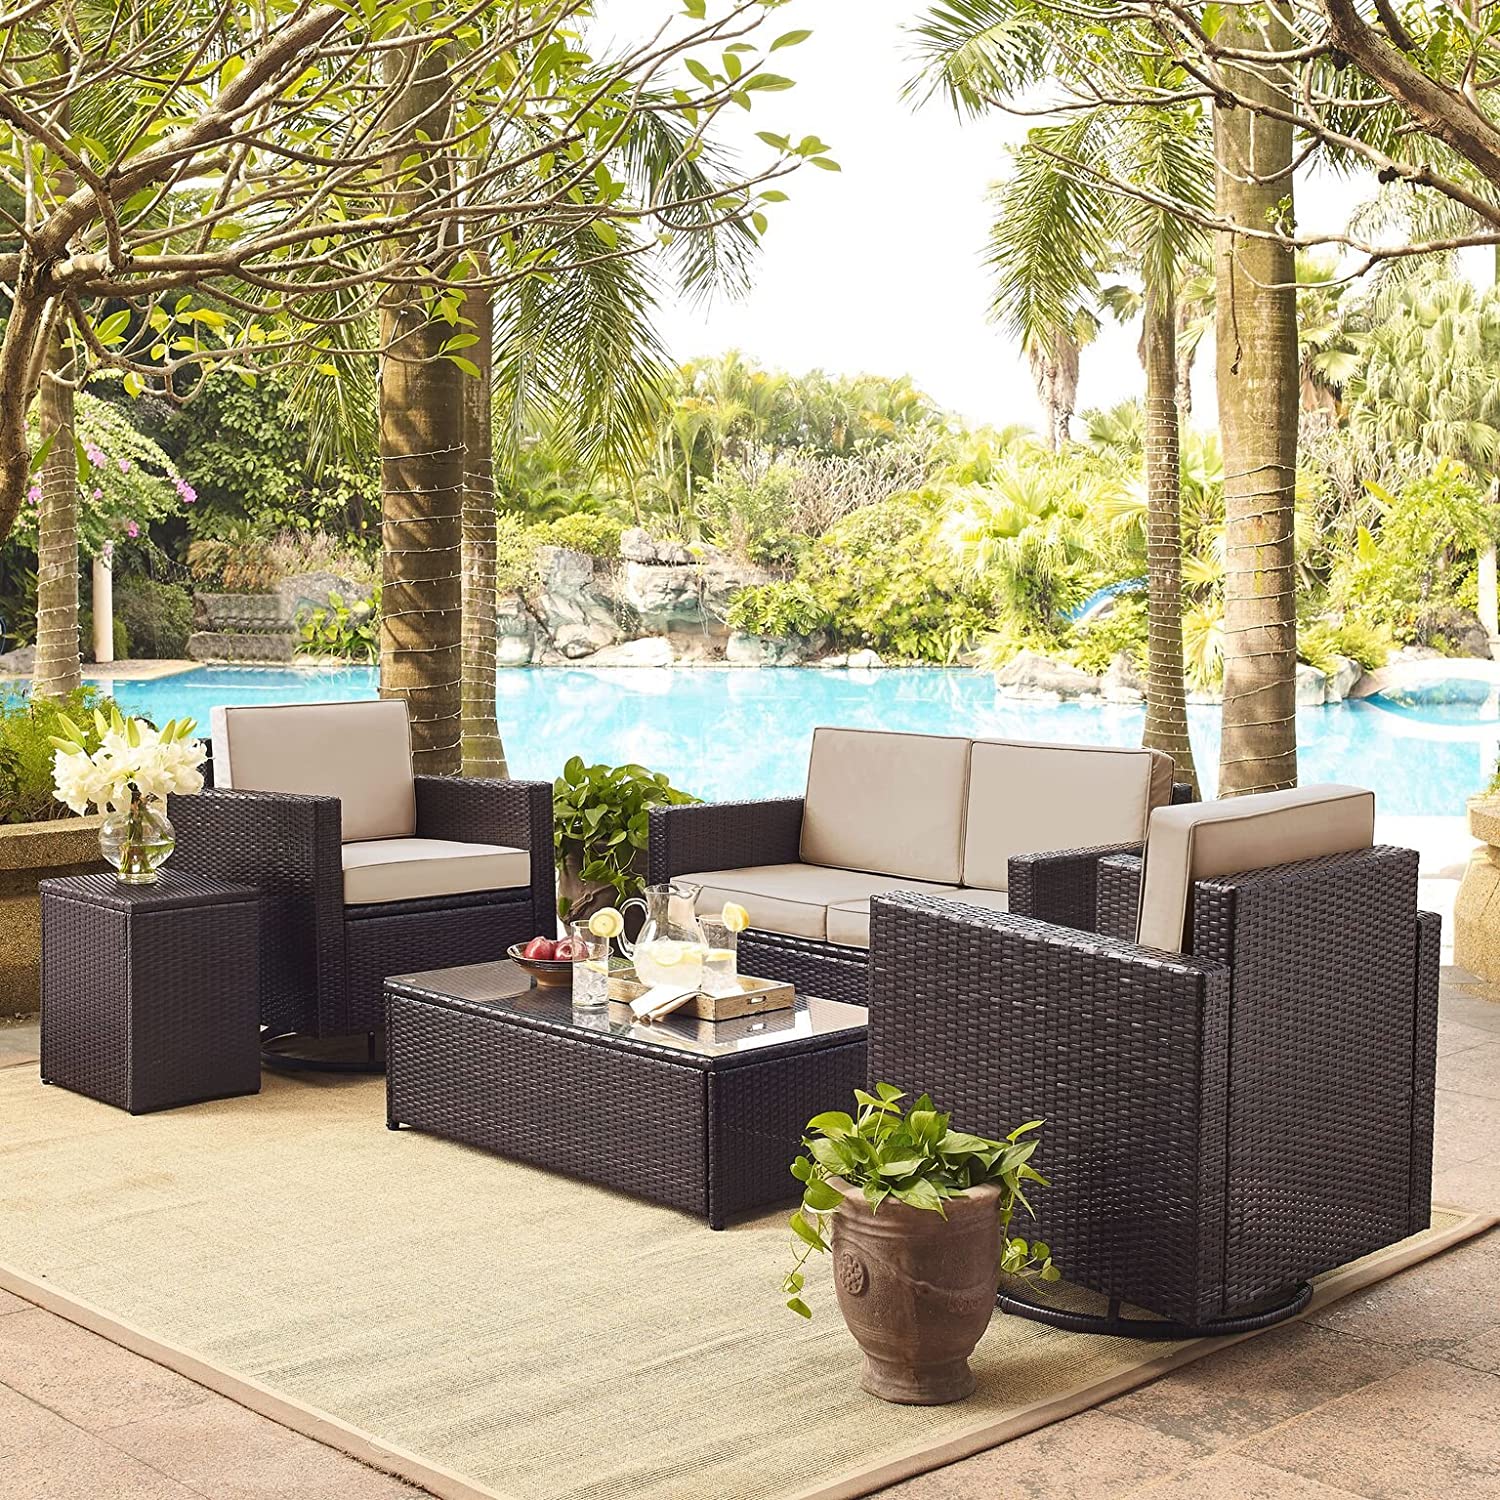 Crosley Palm Harbor 5 Piece Wicker Patio Sofa Set in Brown and Sand - image 3 of 3